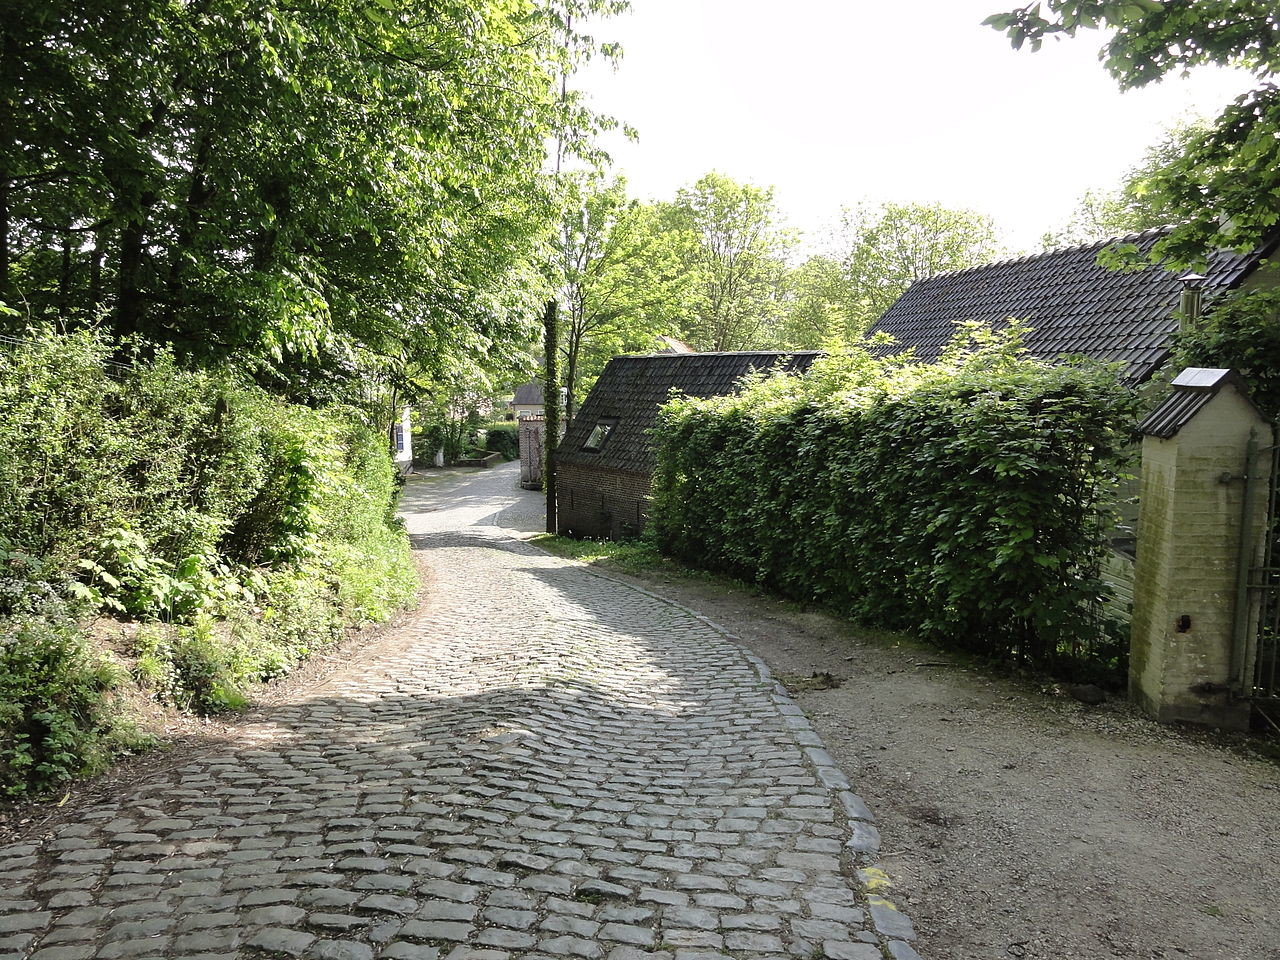 Molenberg climb. photo: LimoWreck, used under a Creative Commons license